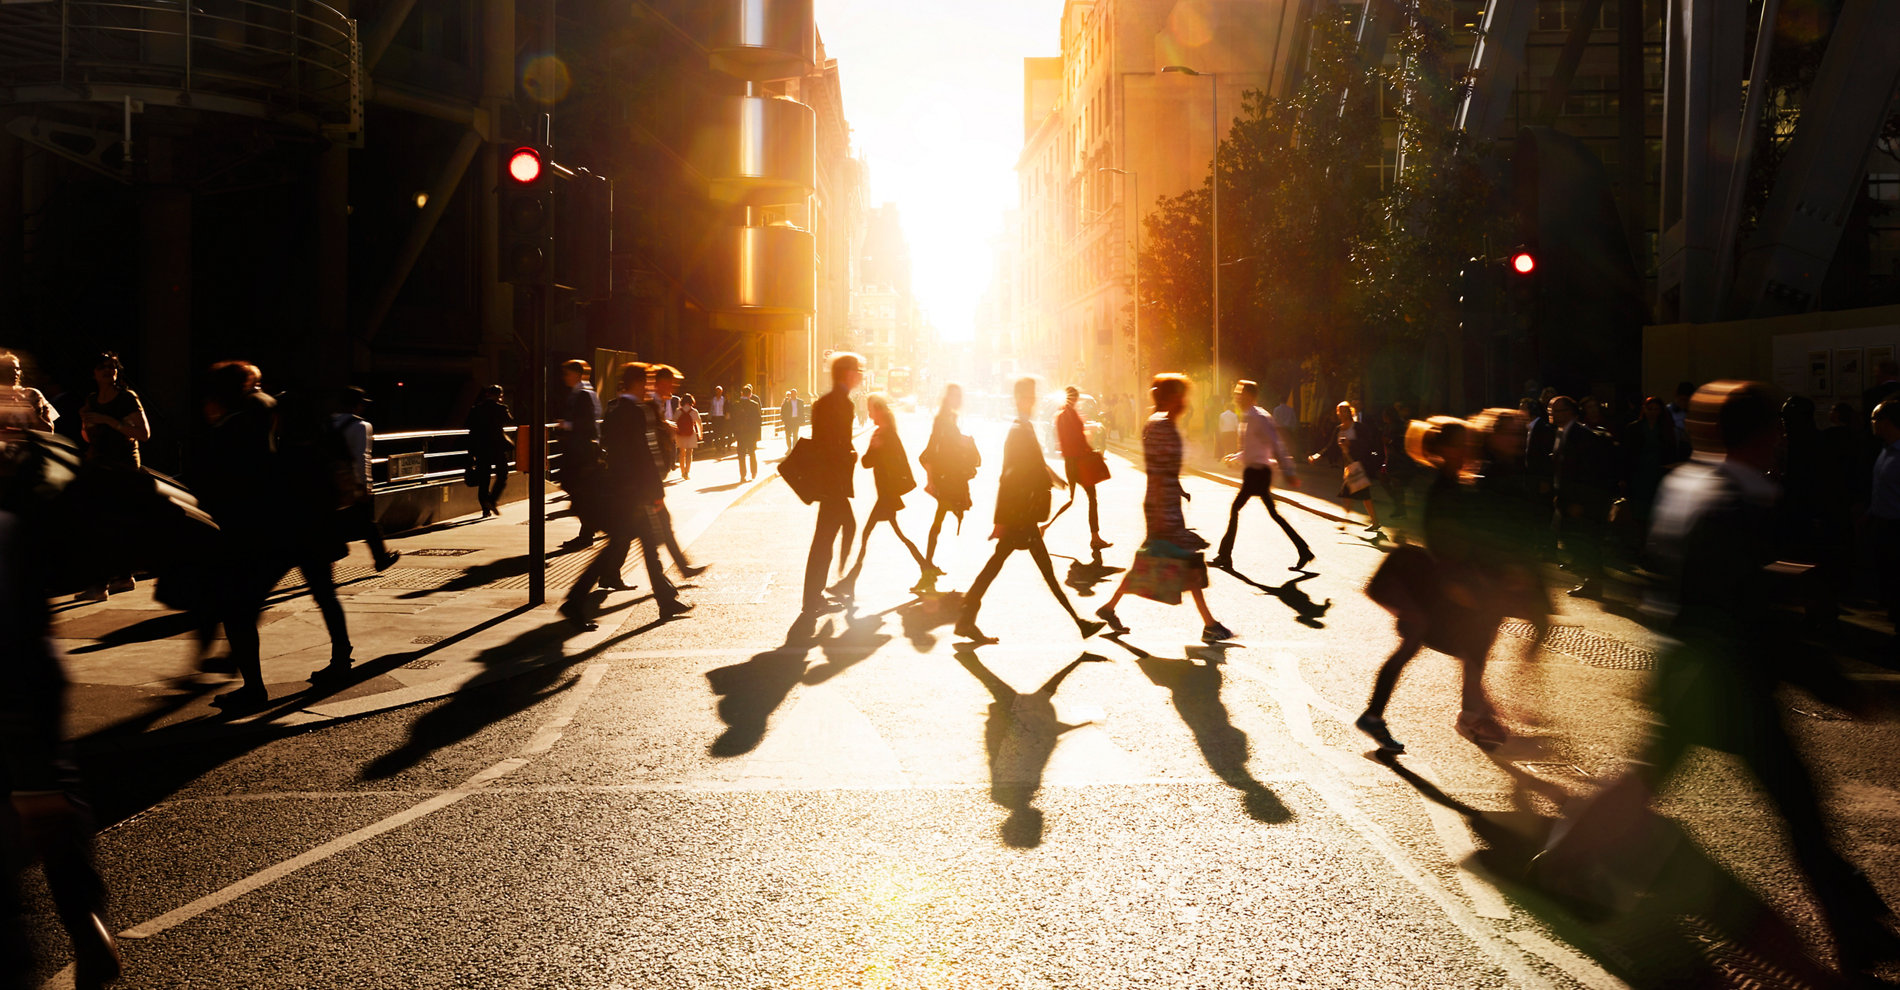 Employees walking to work in the city at sunrise